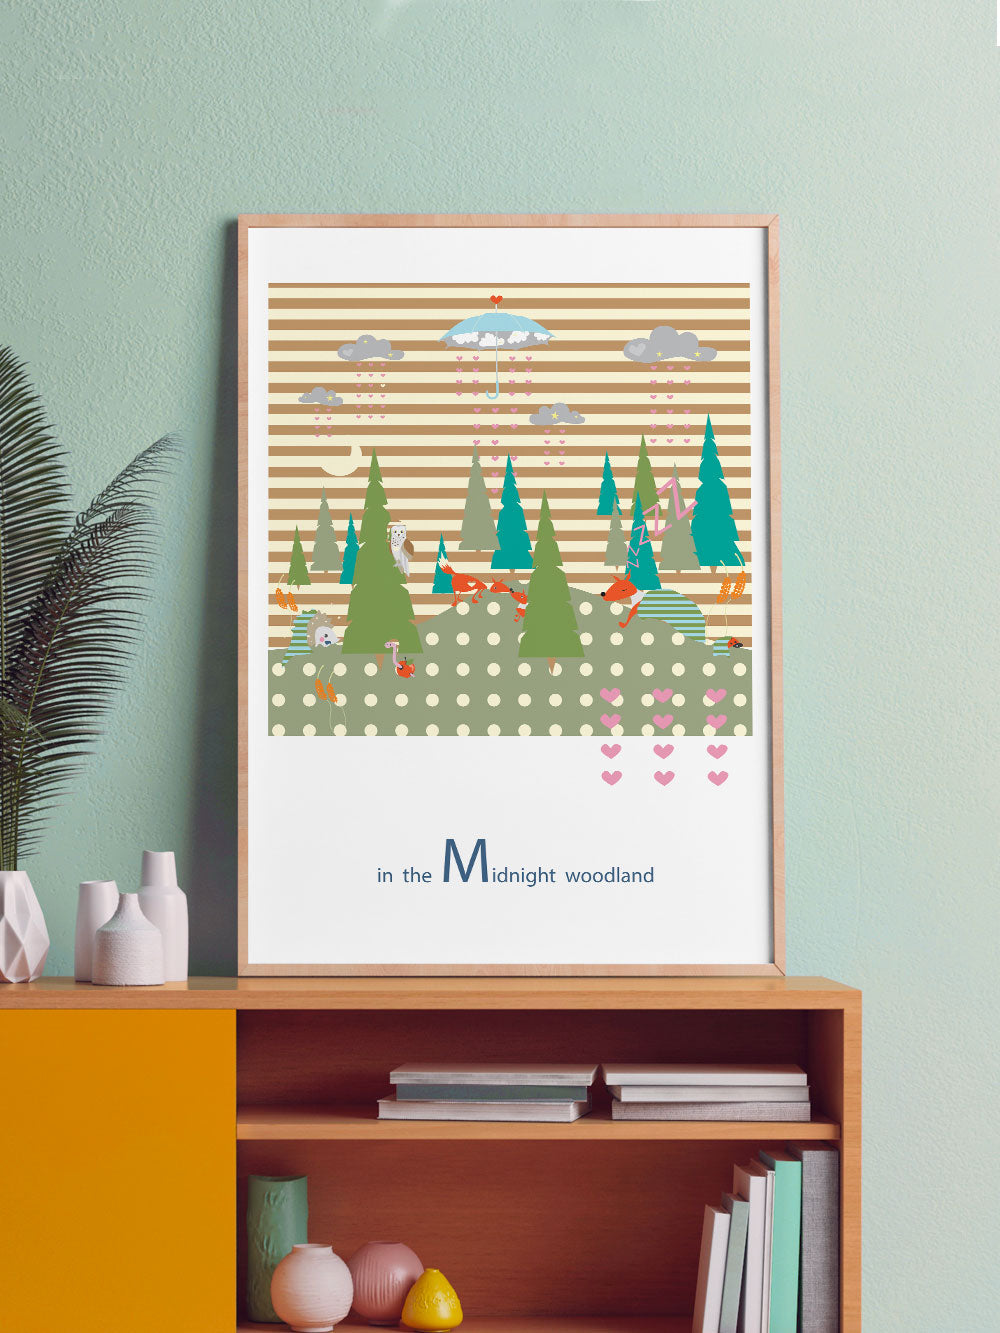 Midnight Woodland Forest Print in a frame on a shelf